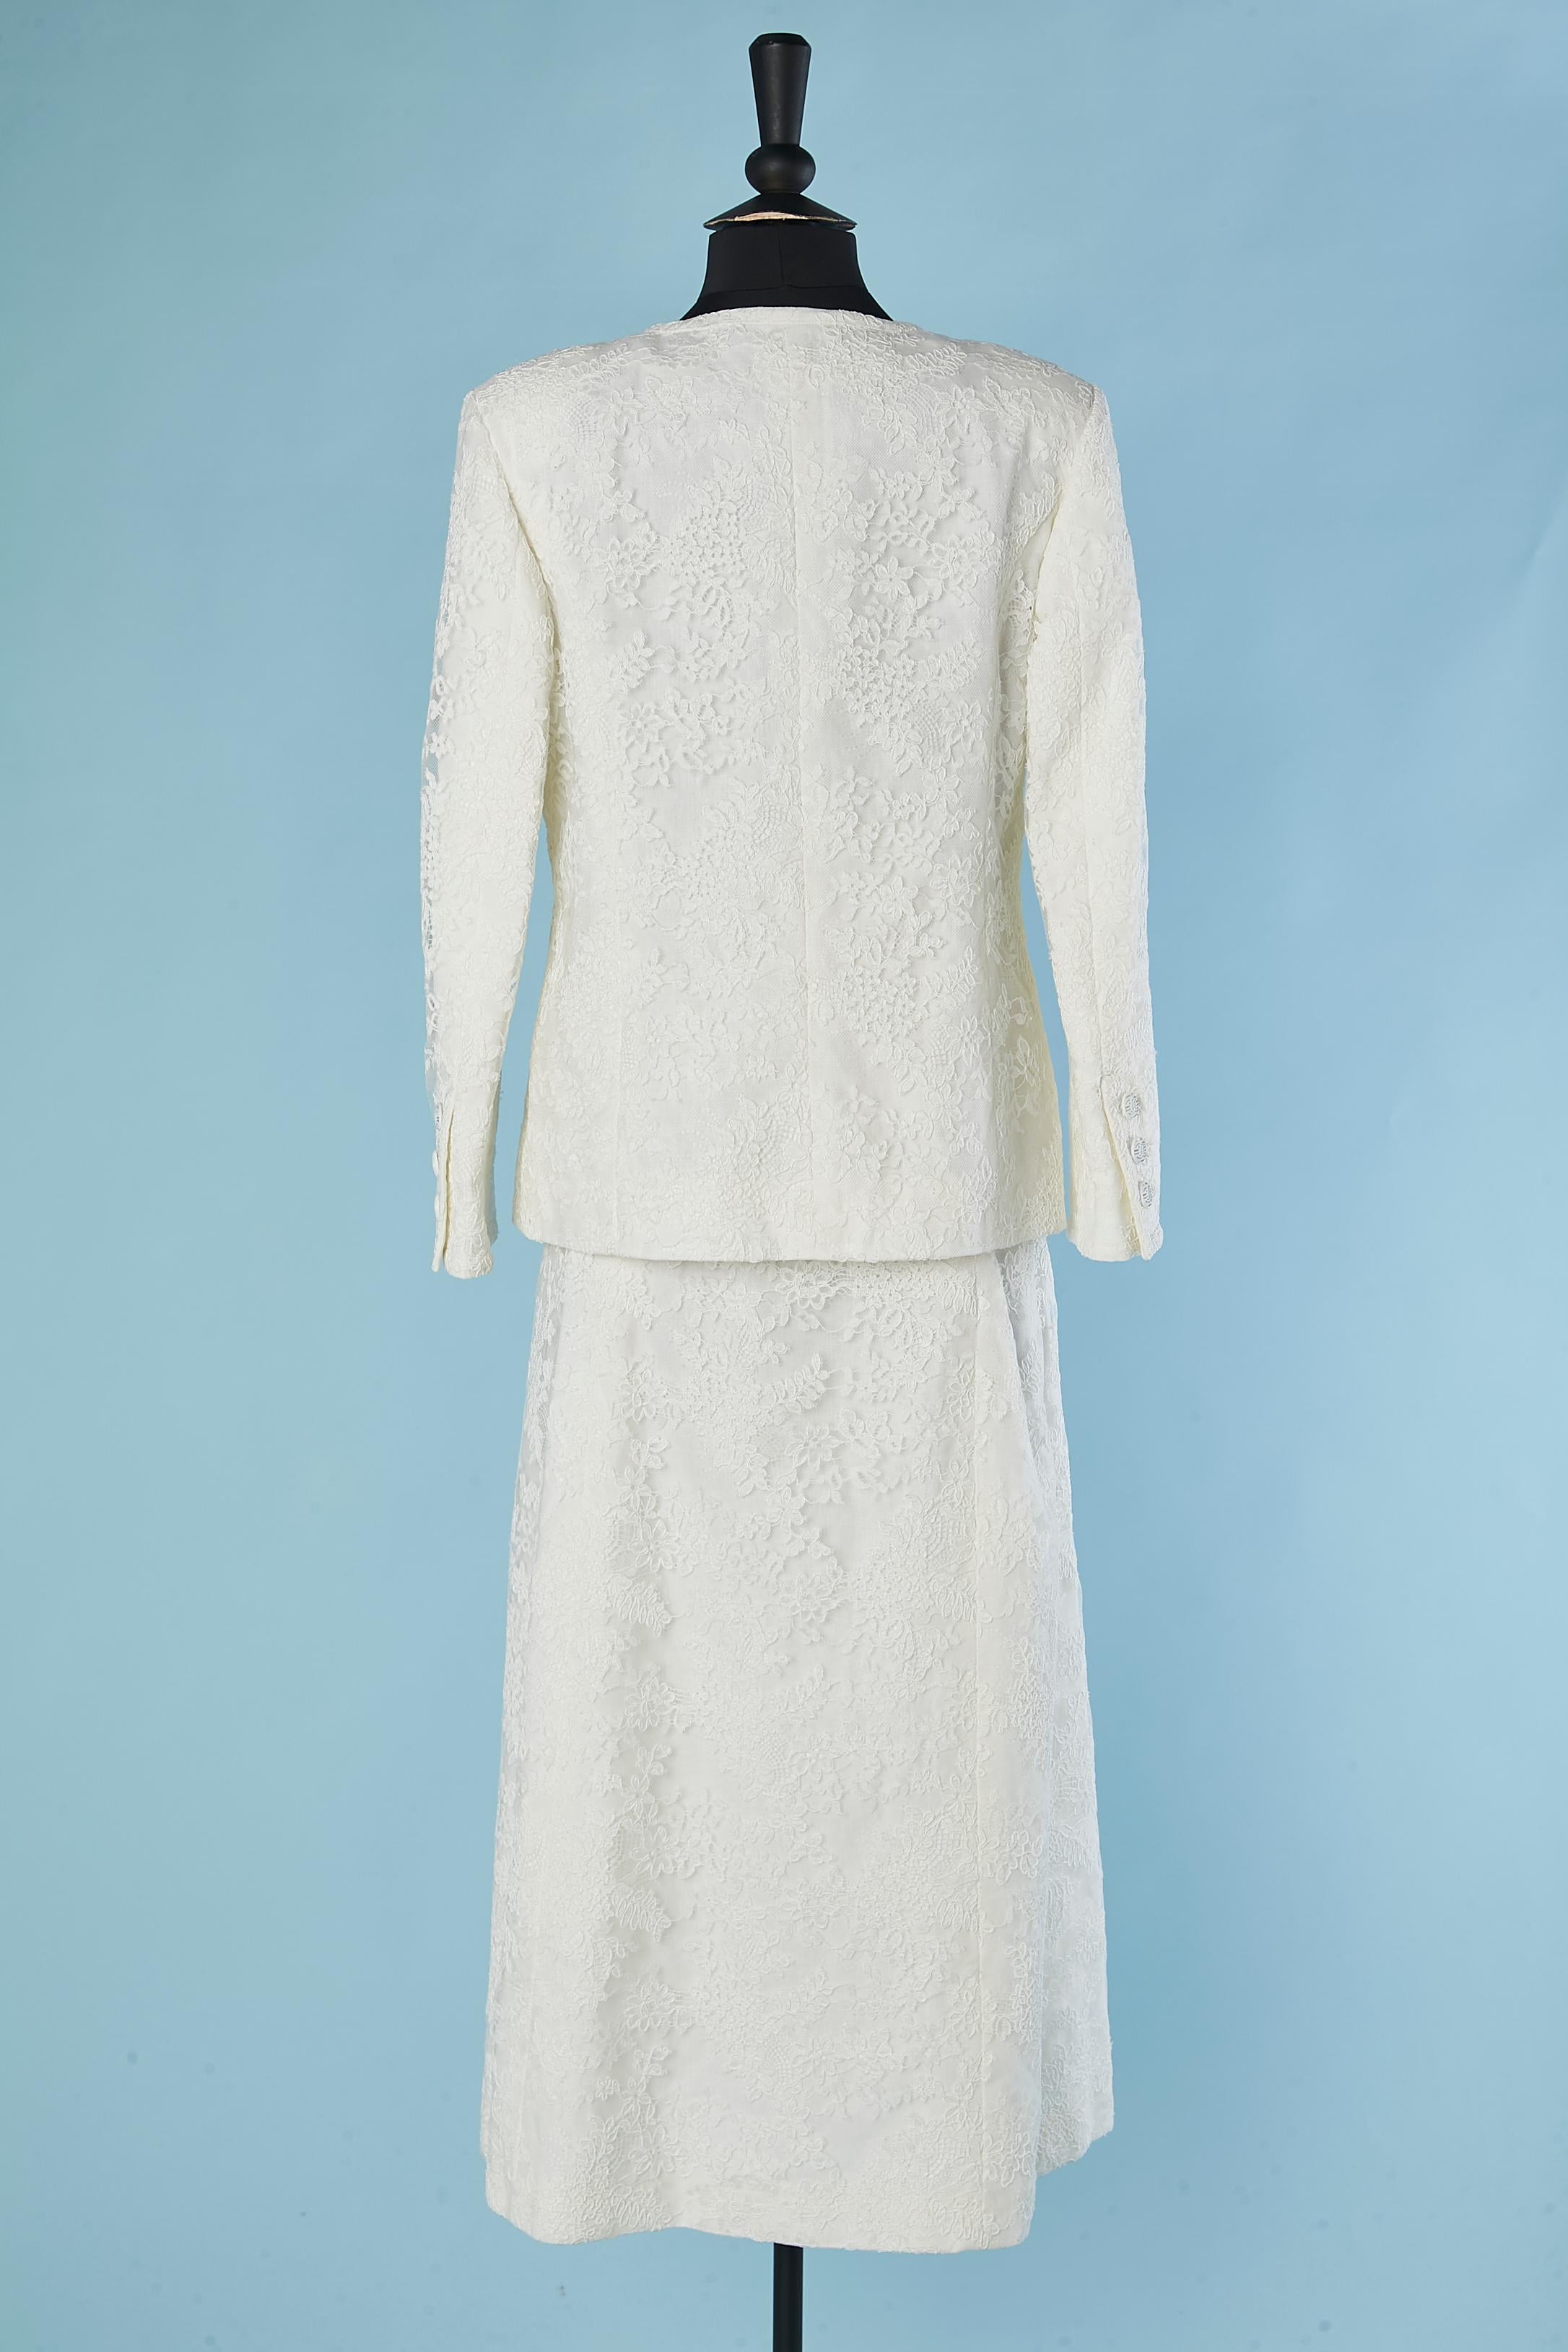 White lace embroidered wedding skirt suit Chanel Couture  For Sale 2